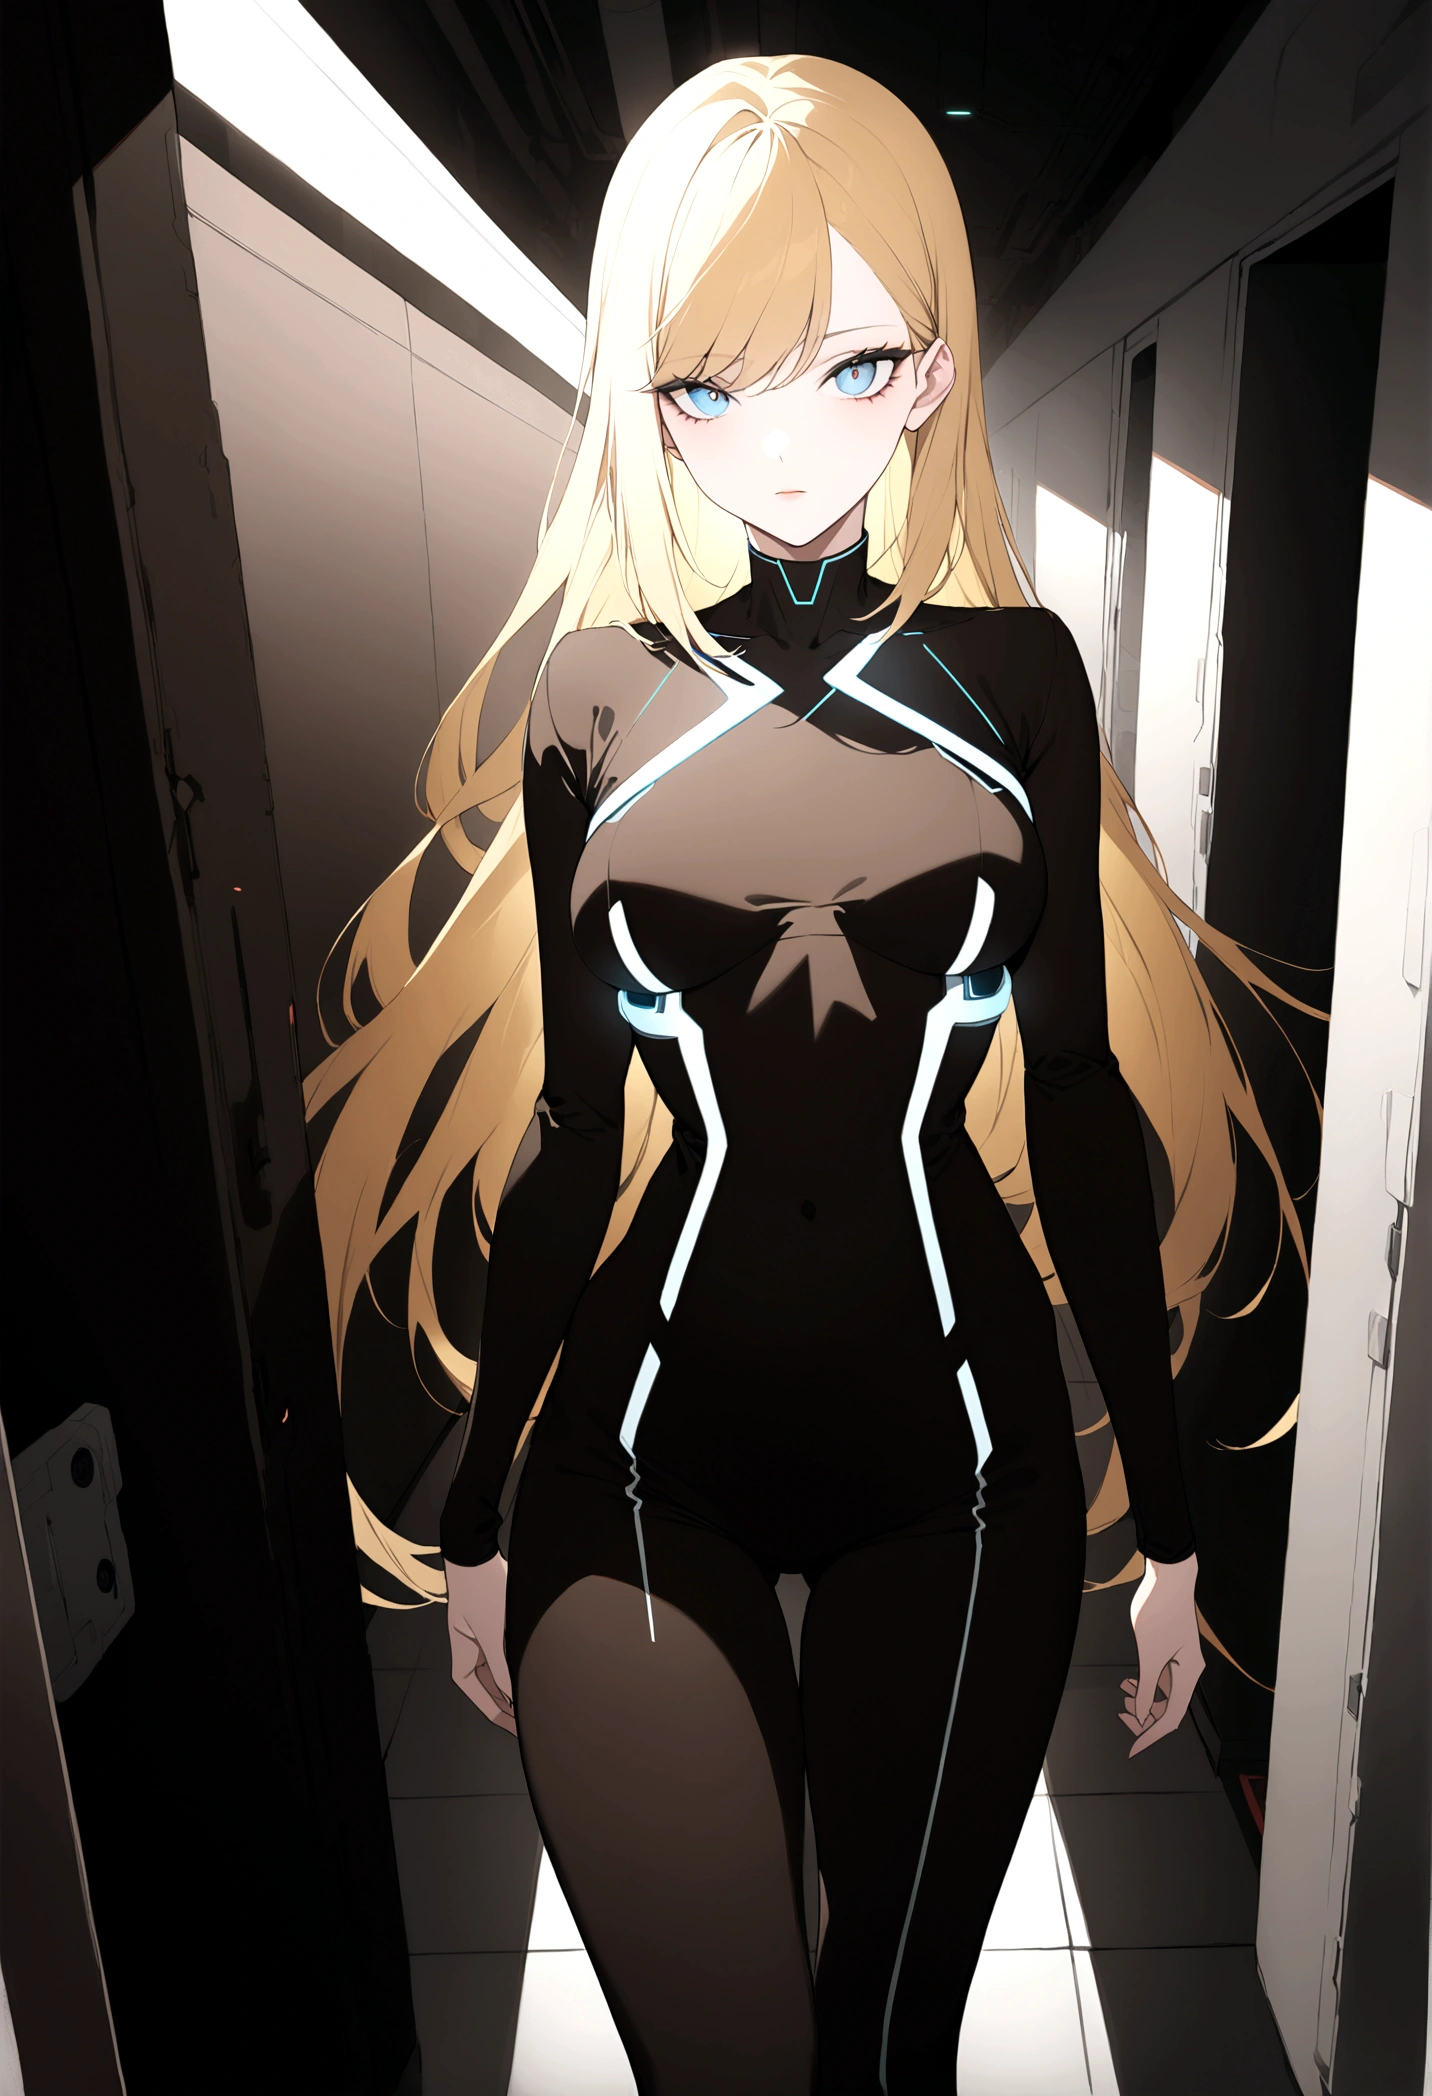 (masterpiece, 32k, 8k, white laboratory corridor setting, character walking towards the viewer) woman, 26 years old, naturally beautiful face, long blonde hair with pink streaks, tight black clothes in cyberpunk style, eyes of different colors, one blue eye and another gray eye